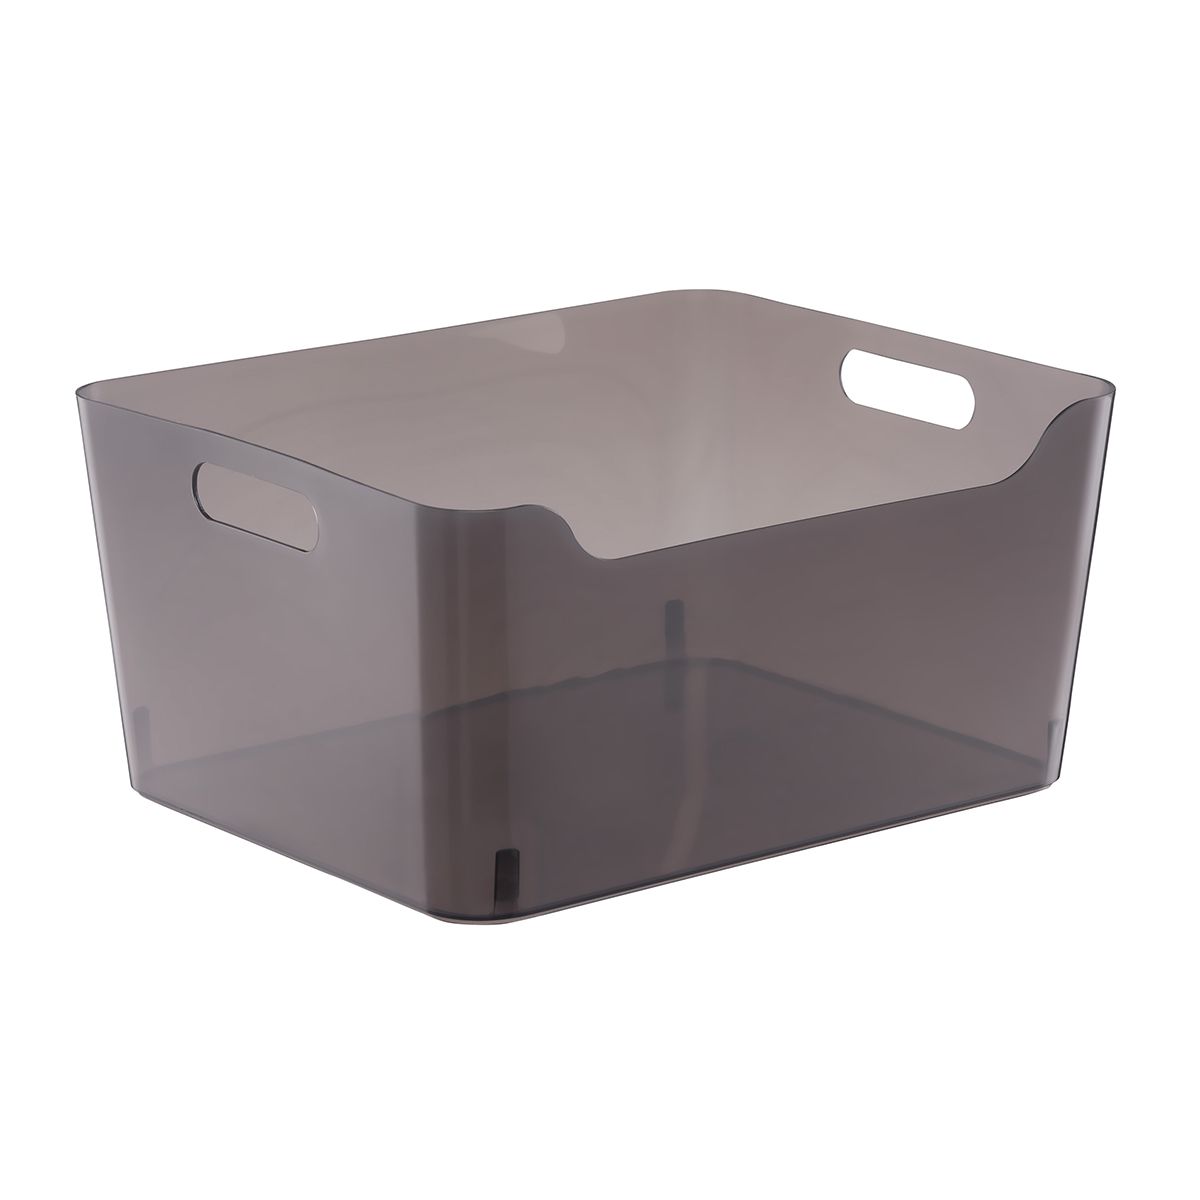 Smoke Plastic Storage Bins with Handles | The Container Store